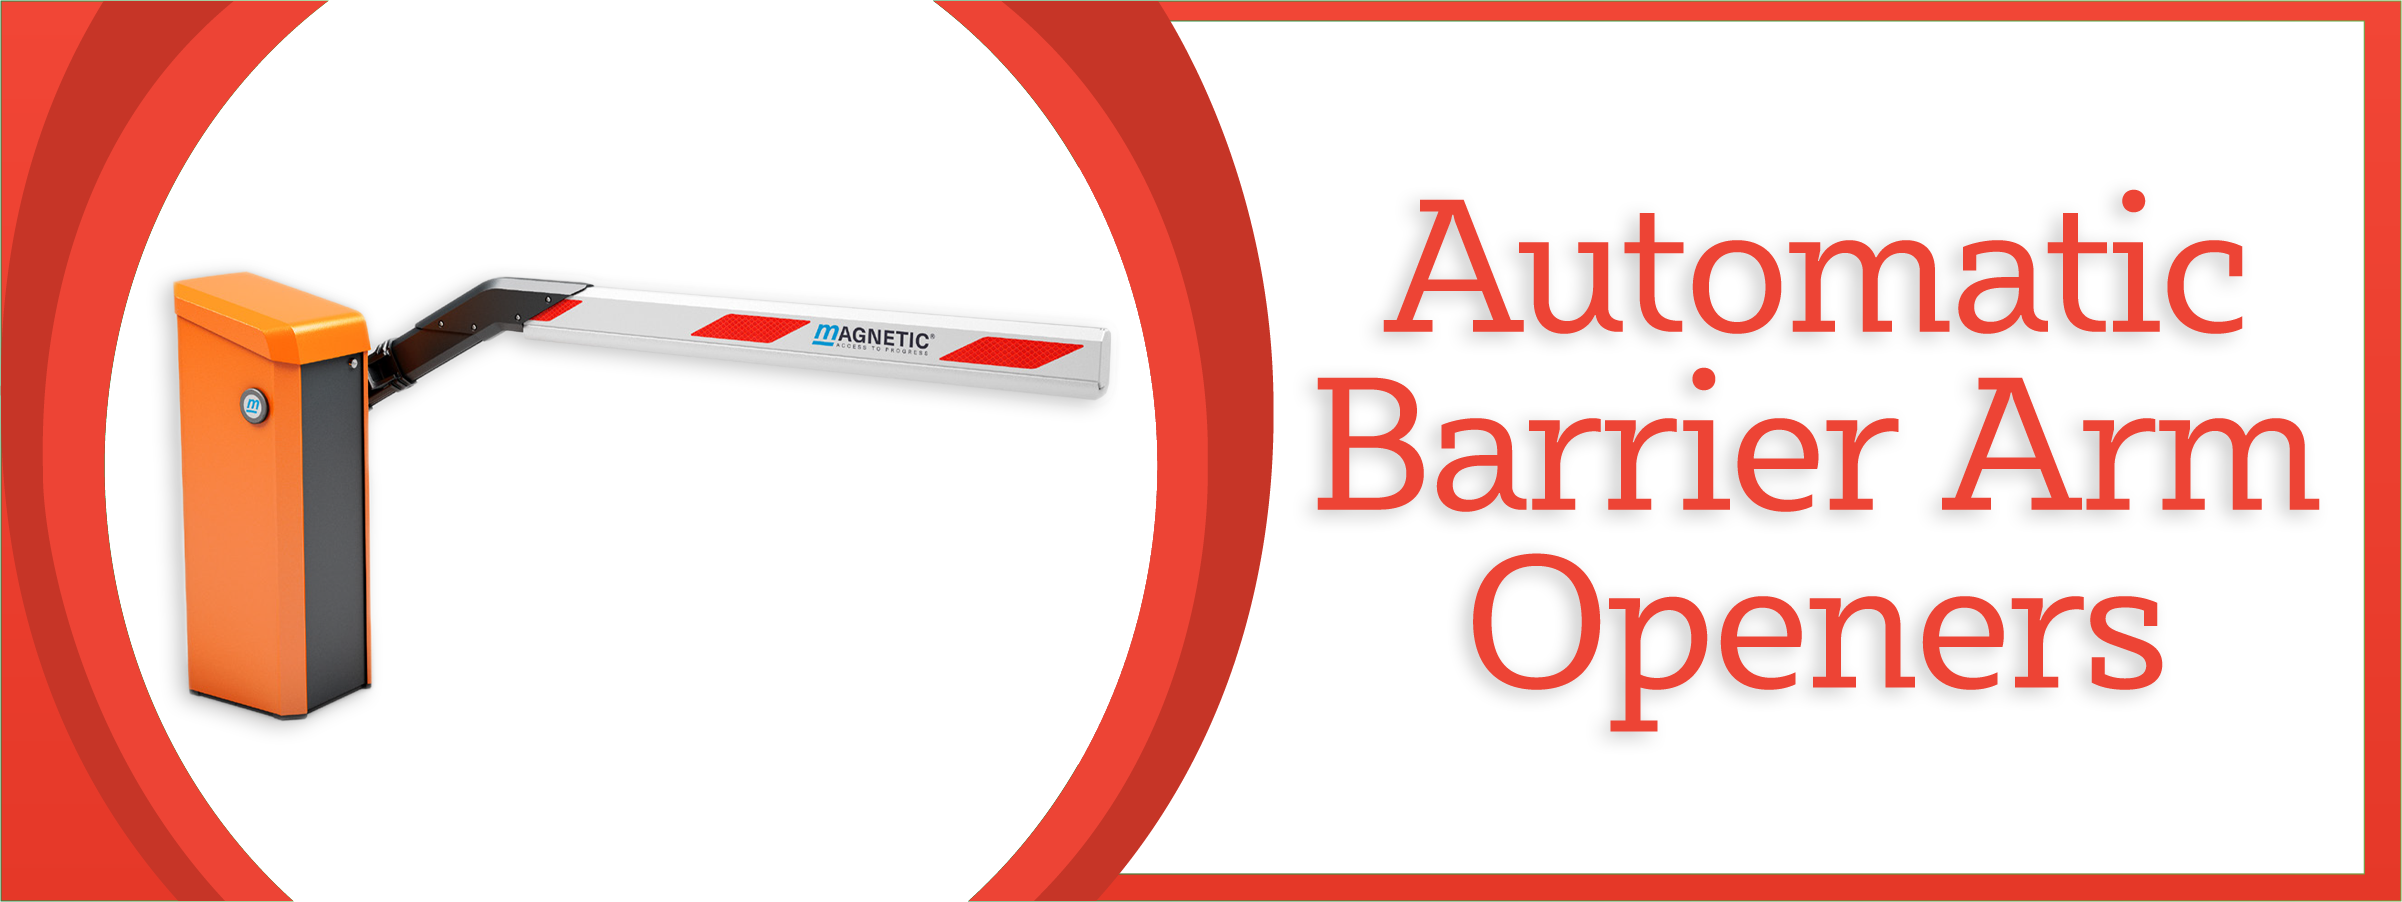 Magnetic AutoControl Automatic Barrier Gate Openers